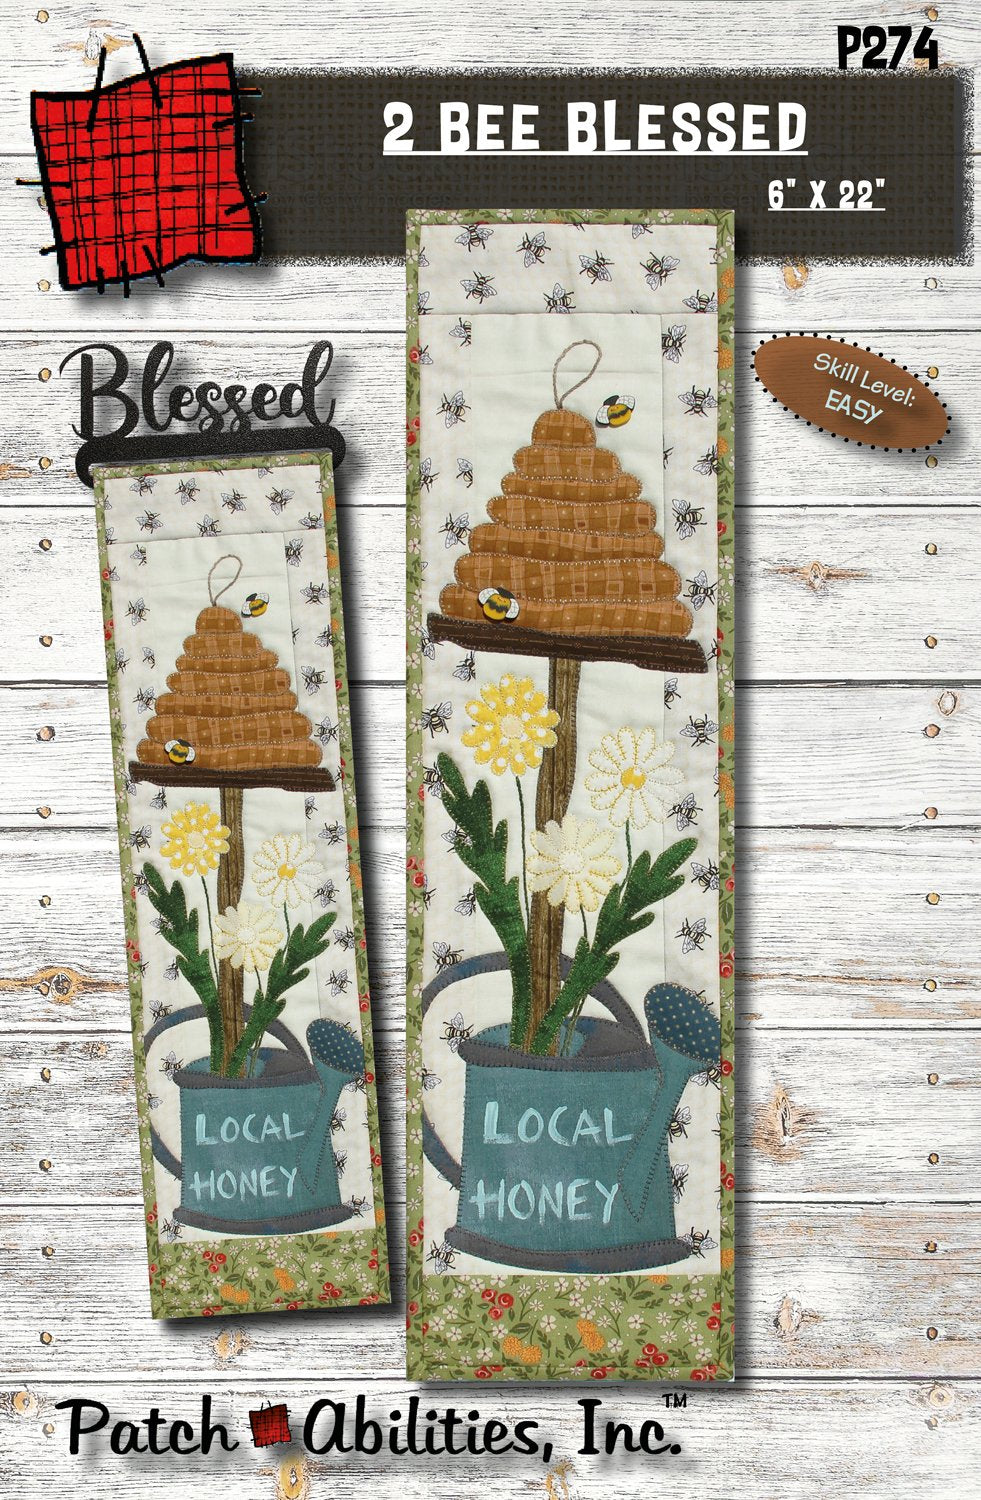 Patch Abilities 2 Bee Blessed-6" x 22"